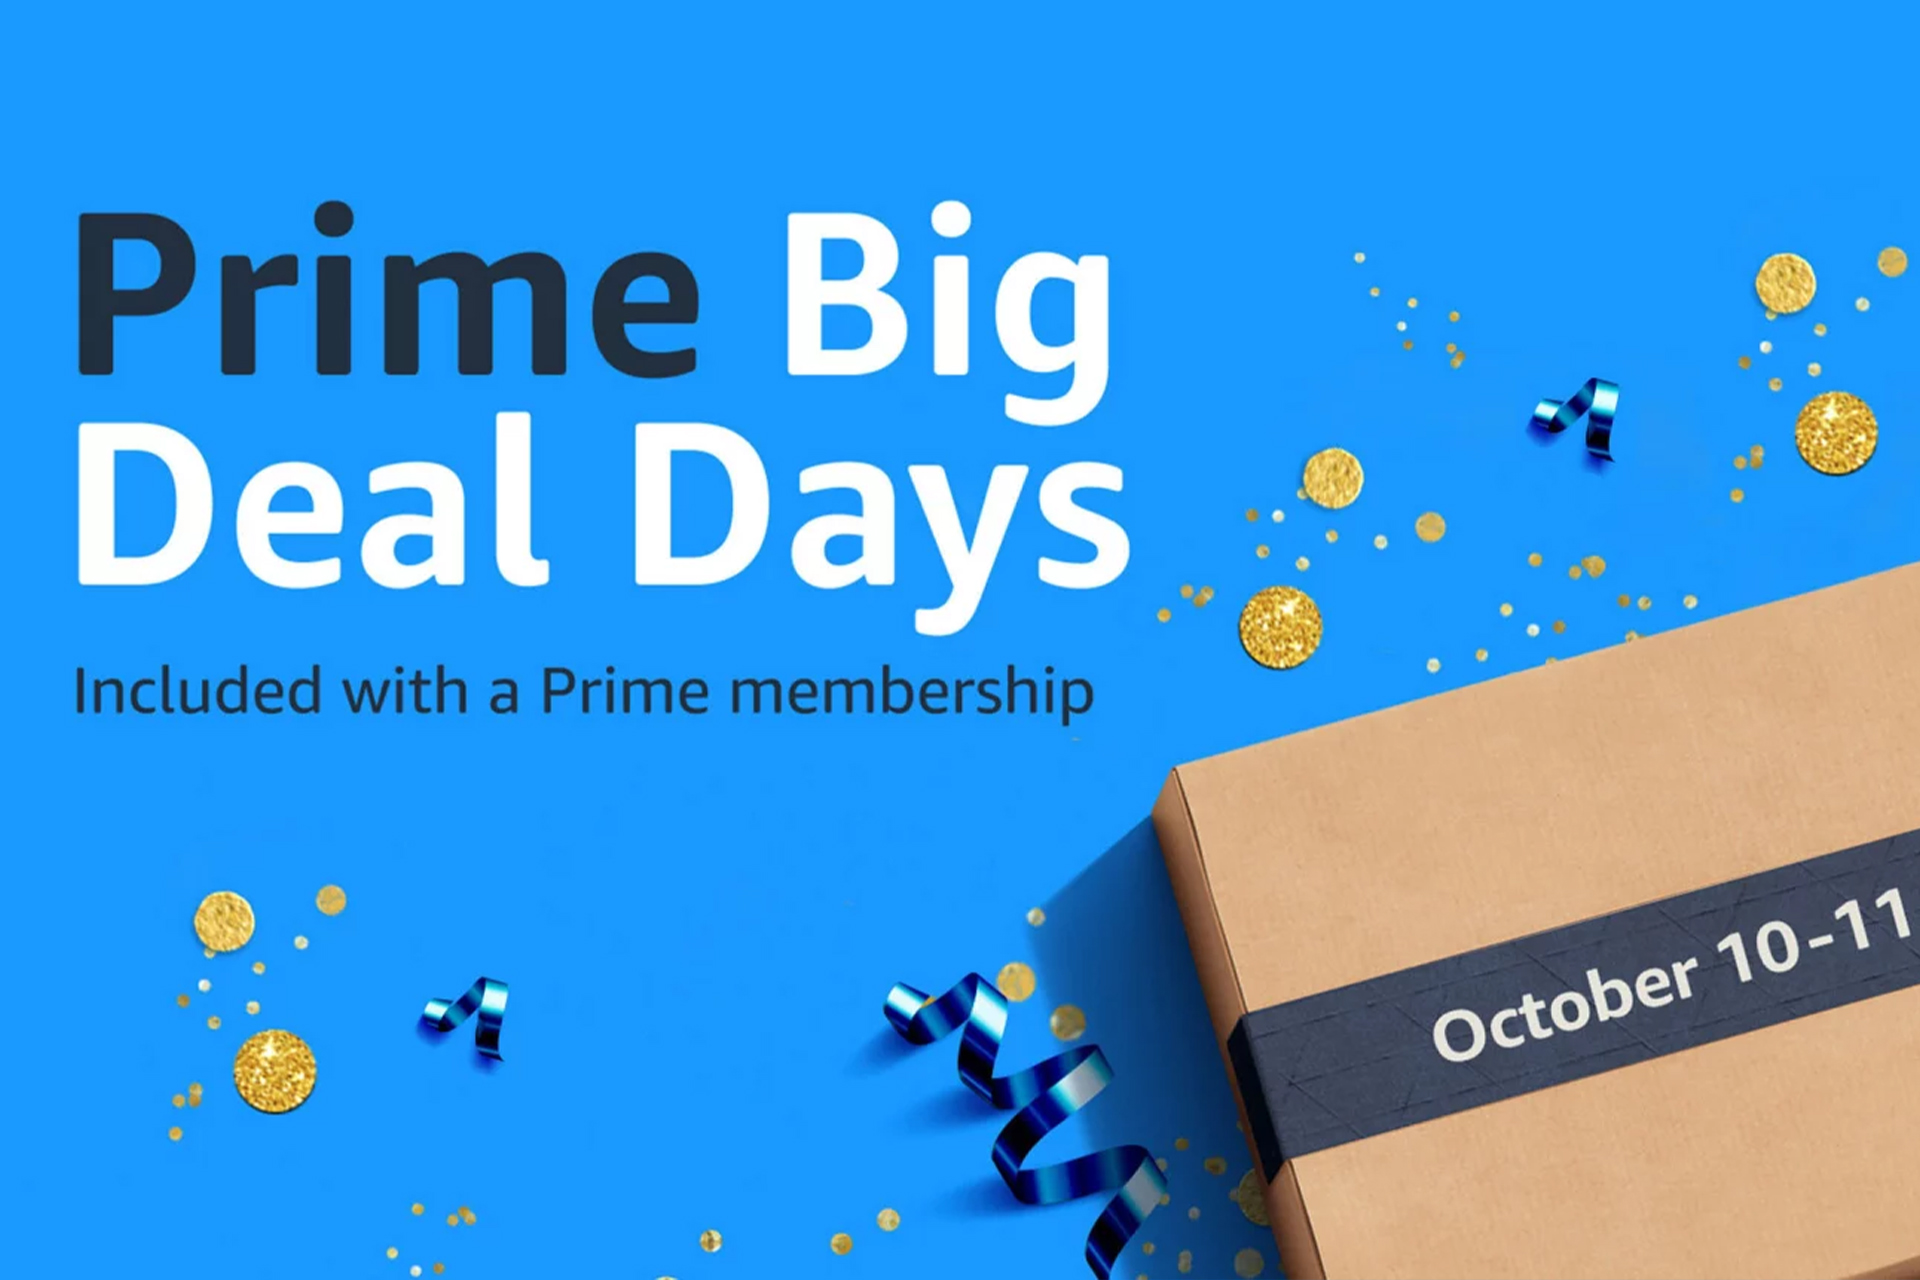 Numerator: Home a Top-Shopped Category during Prime Big Deal Days